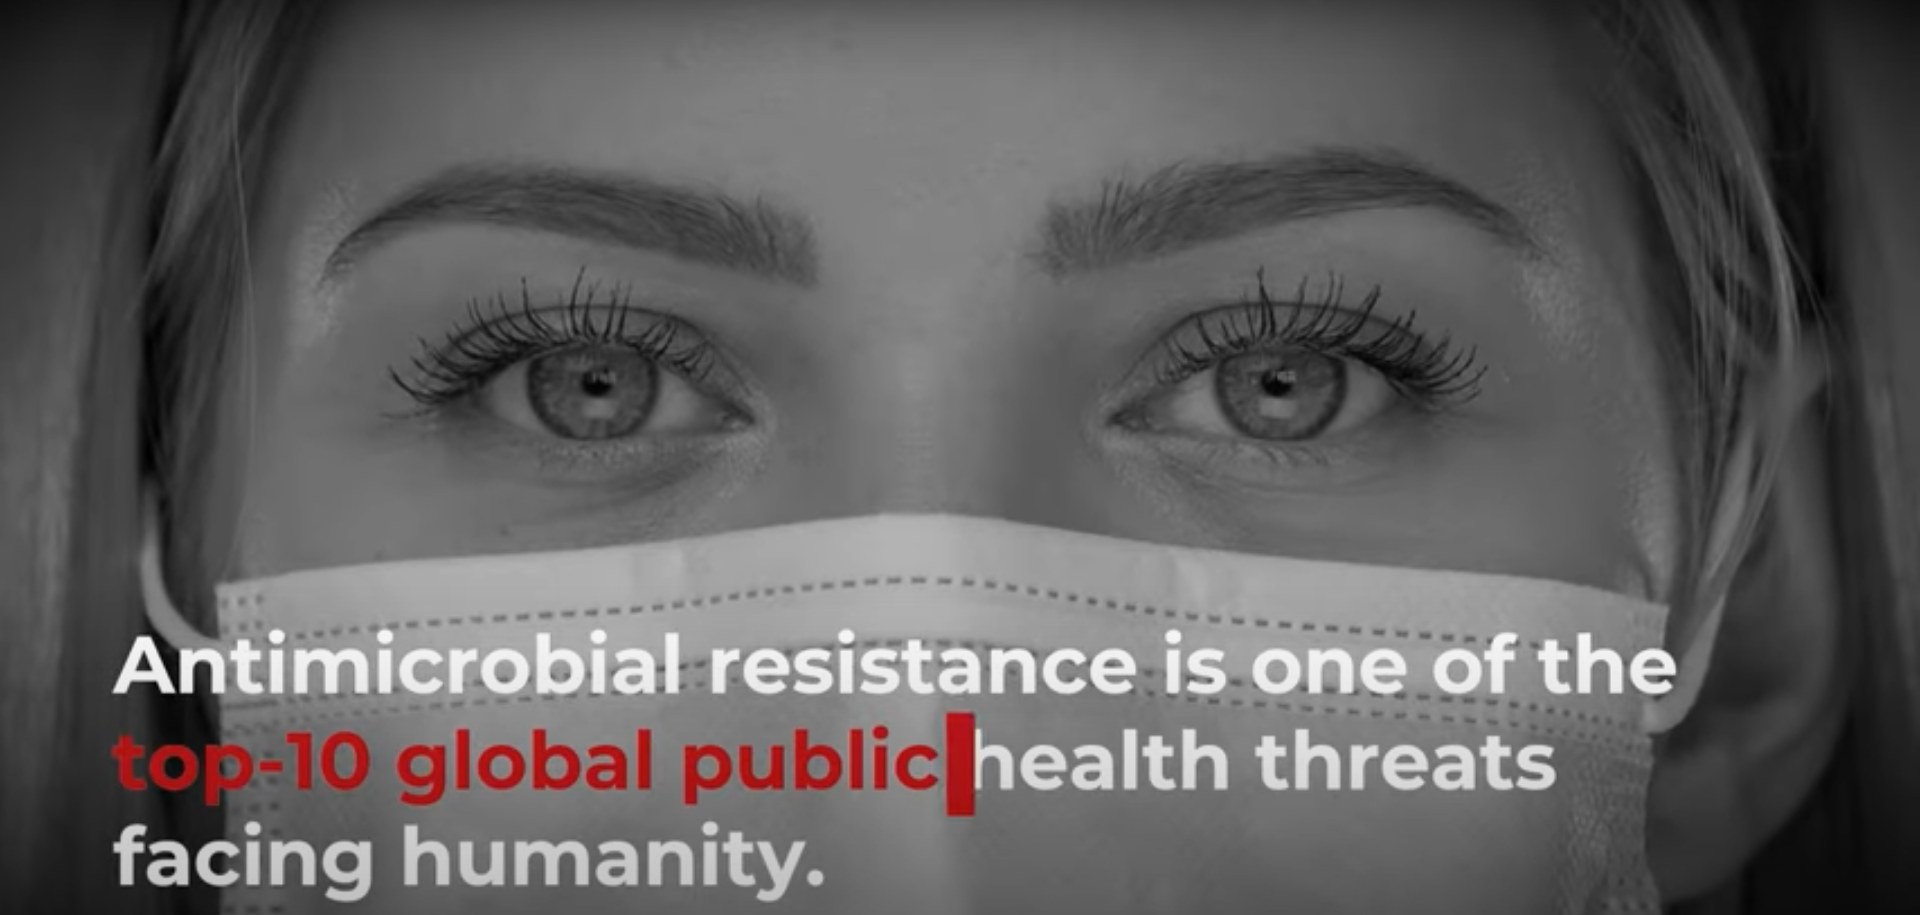 Antimicrobial resistance is one of the top-10 global public health threats facing humanity